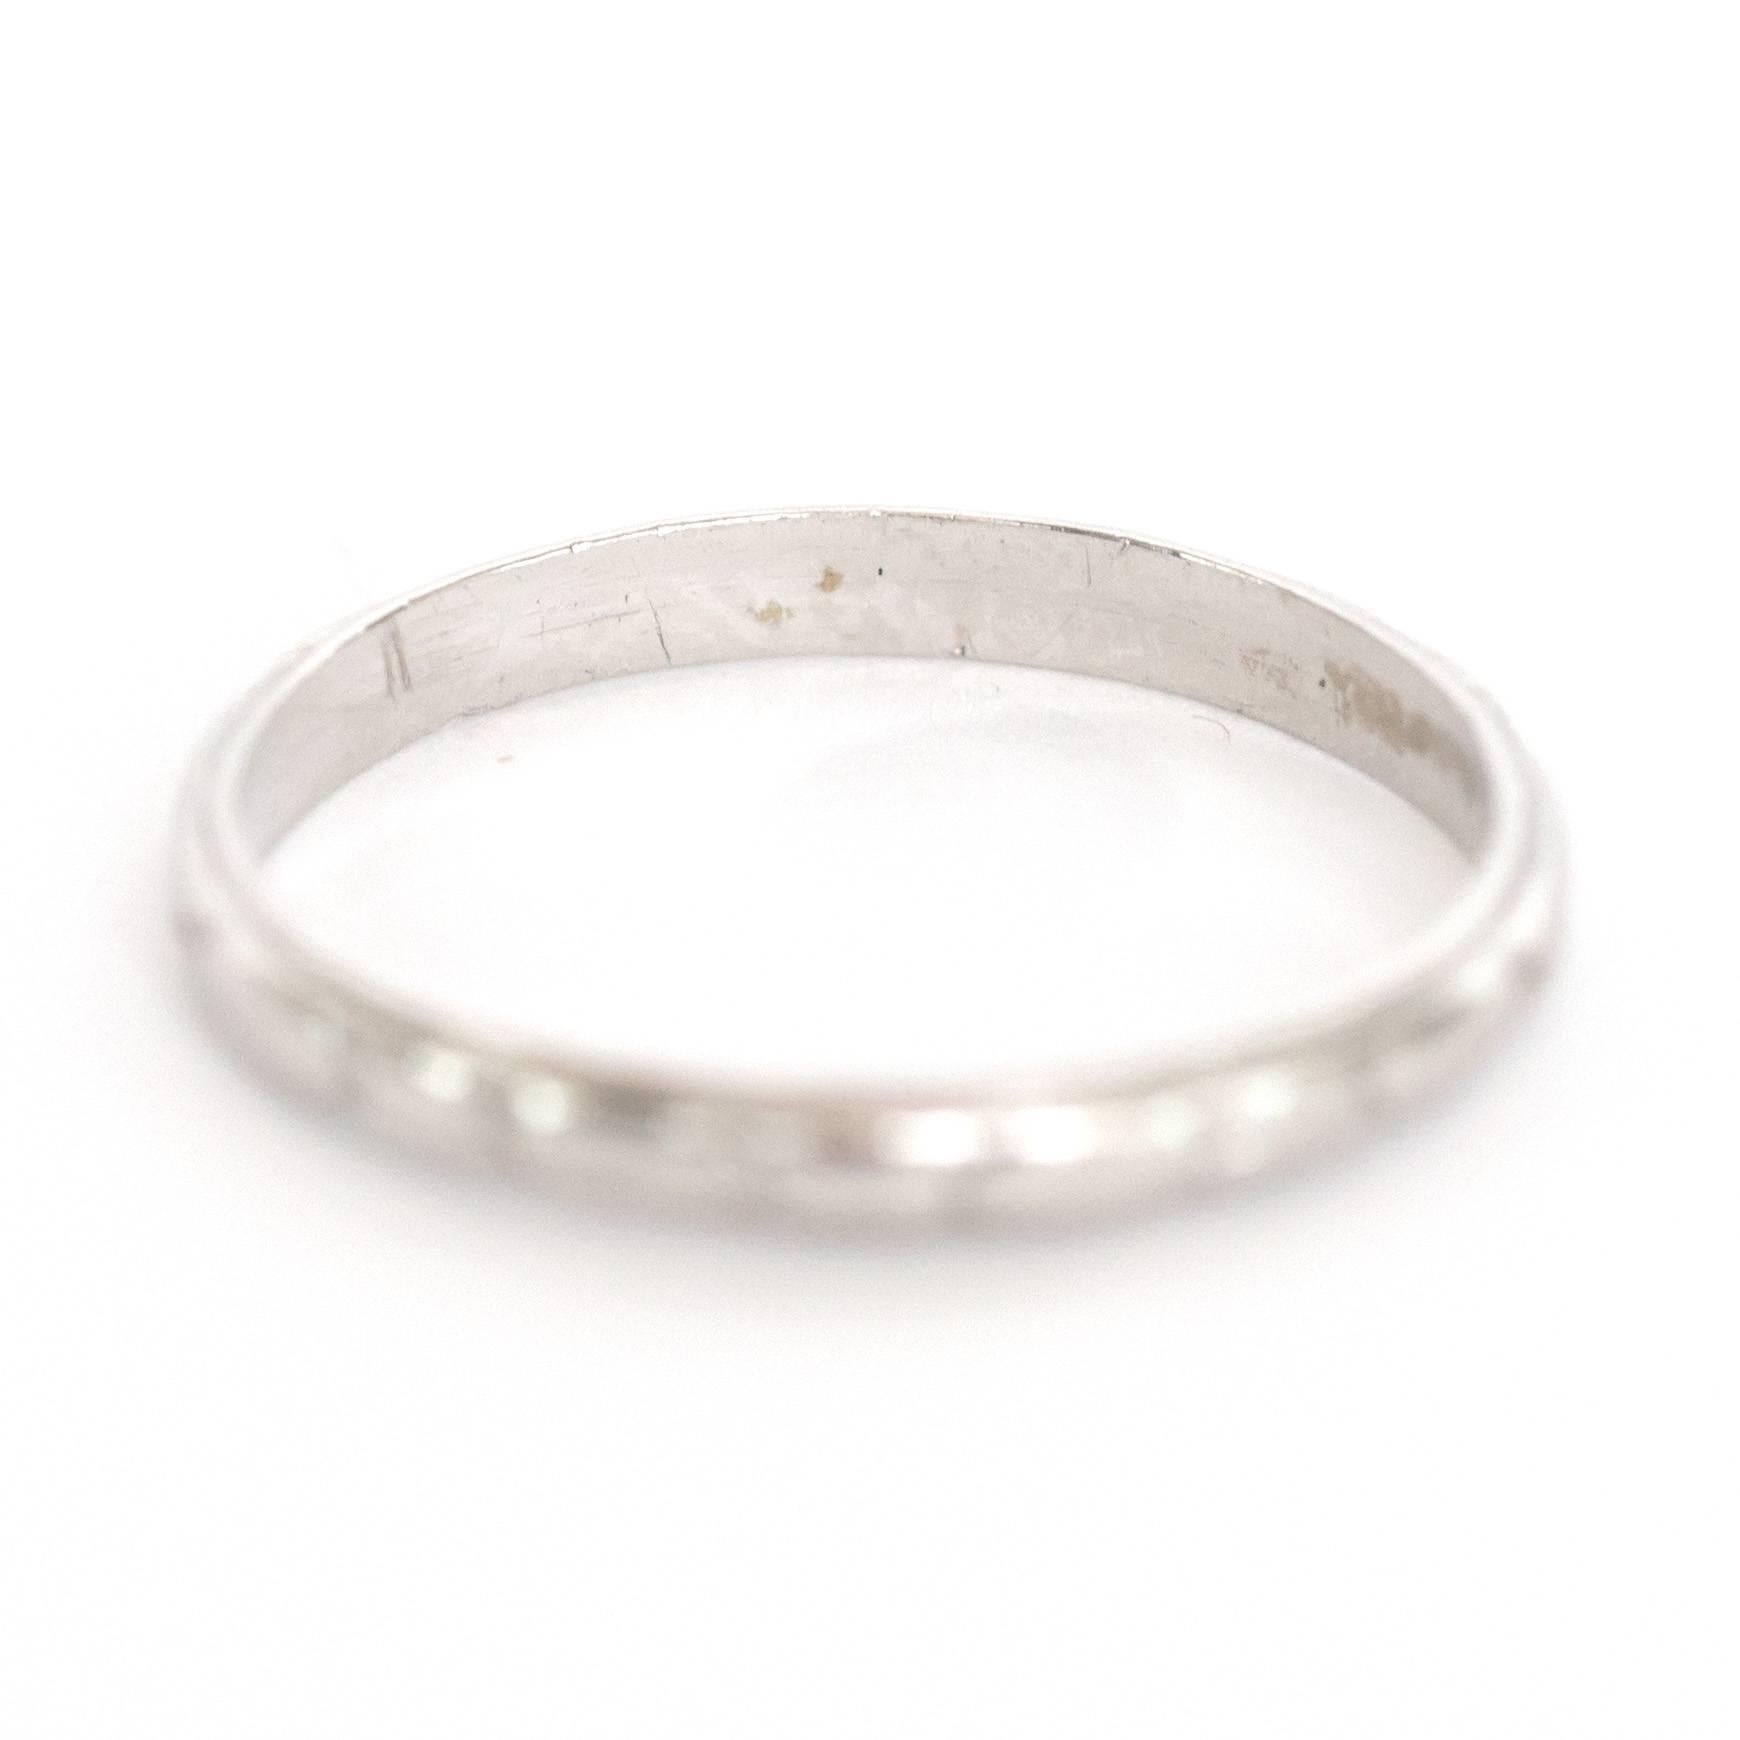 Item Details: 
Ring Size: 6
Metal Type: Platinum
Weight: 2.2 grams

Finger to Top of Stone Measurement: 1.06mm